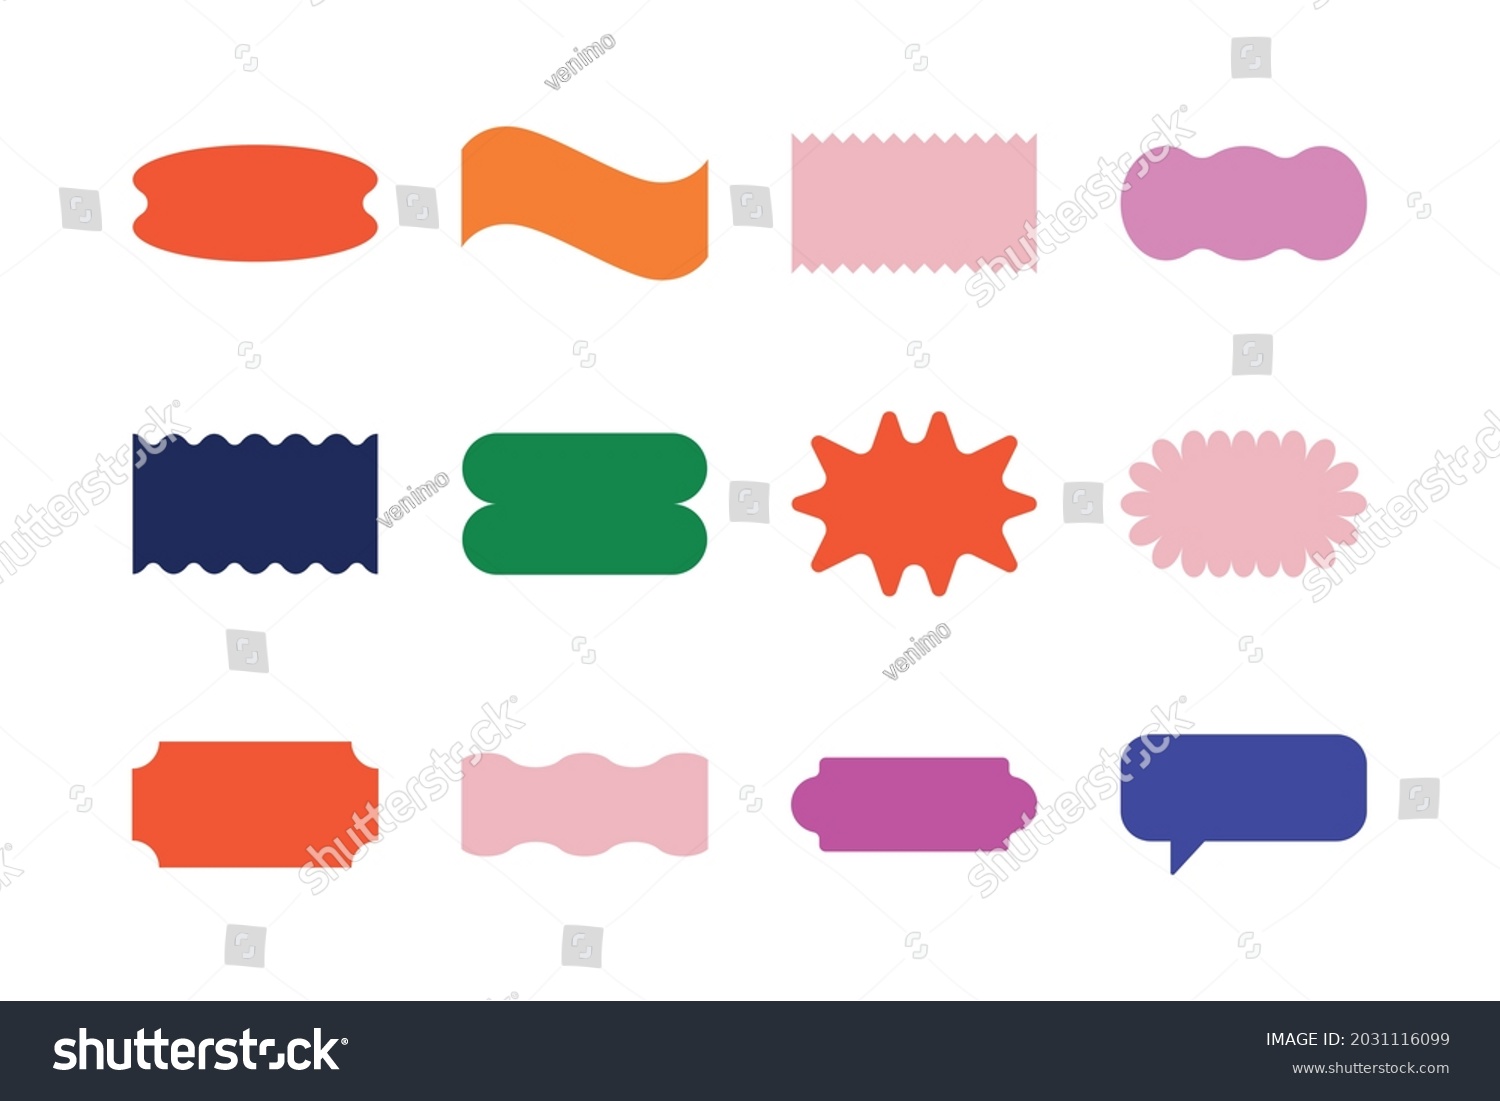 SVG of Vector set of design elements, patches and stickers with copy space for text - abstract background elements for branding, packaging, prints and social media posts

 svg